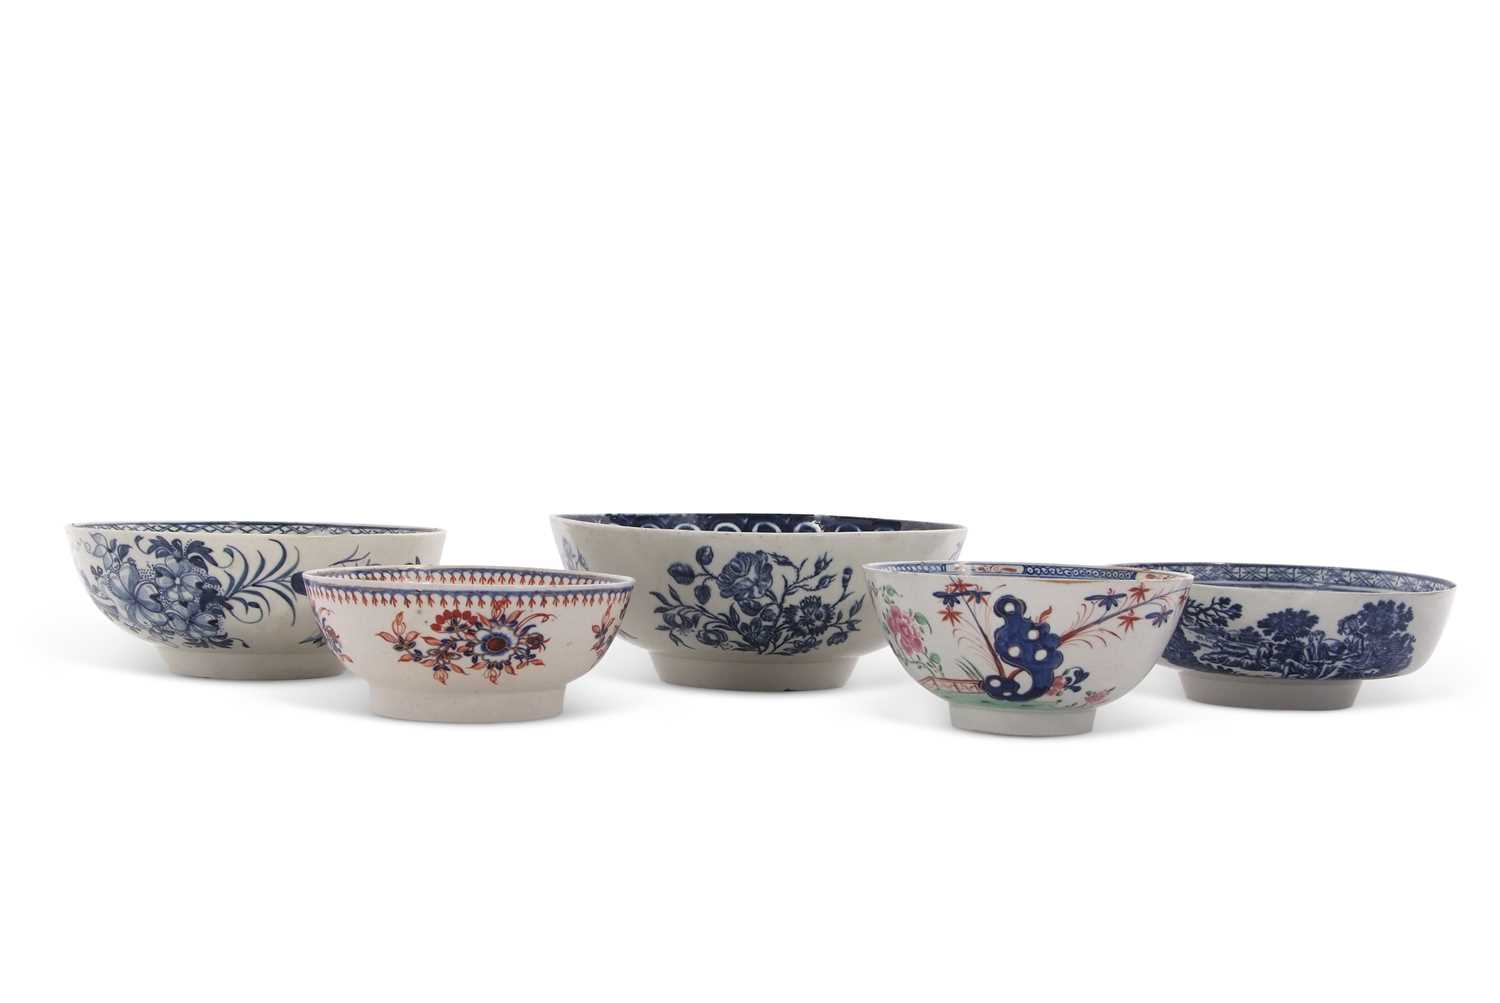 A collection of 18th Century English porcelain bowls with blue and white and polychrome designs